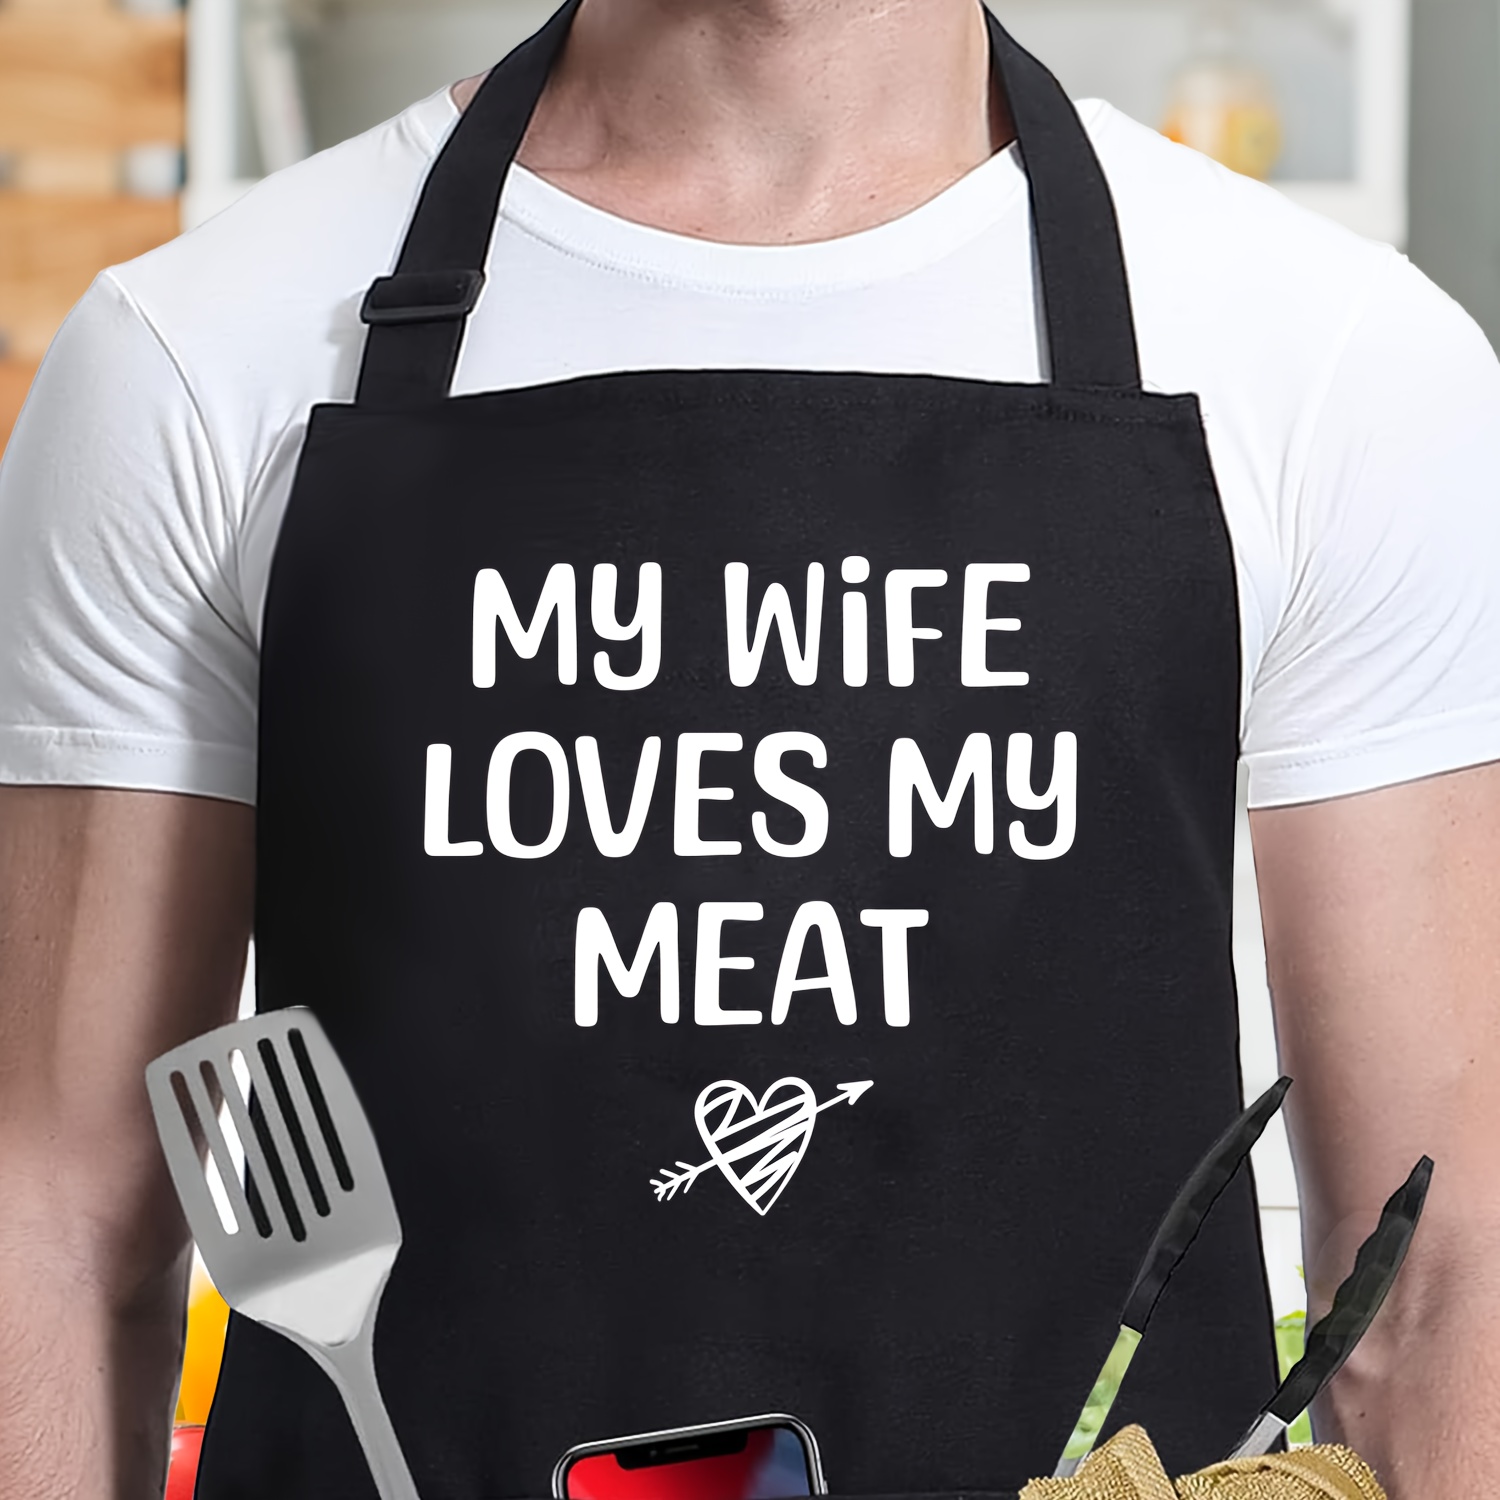 

1pc Black Funny Apron, Father's Day Gift, With 2 Pockets, Adjustable Bib Apron For Men And Women, Barbecue Gift, Cooking Kitchen